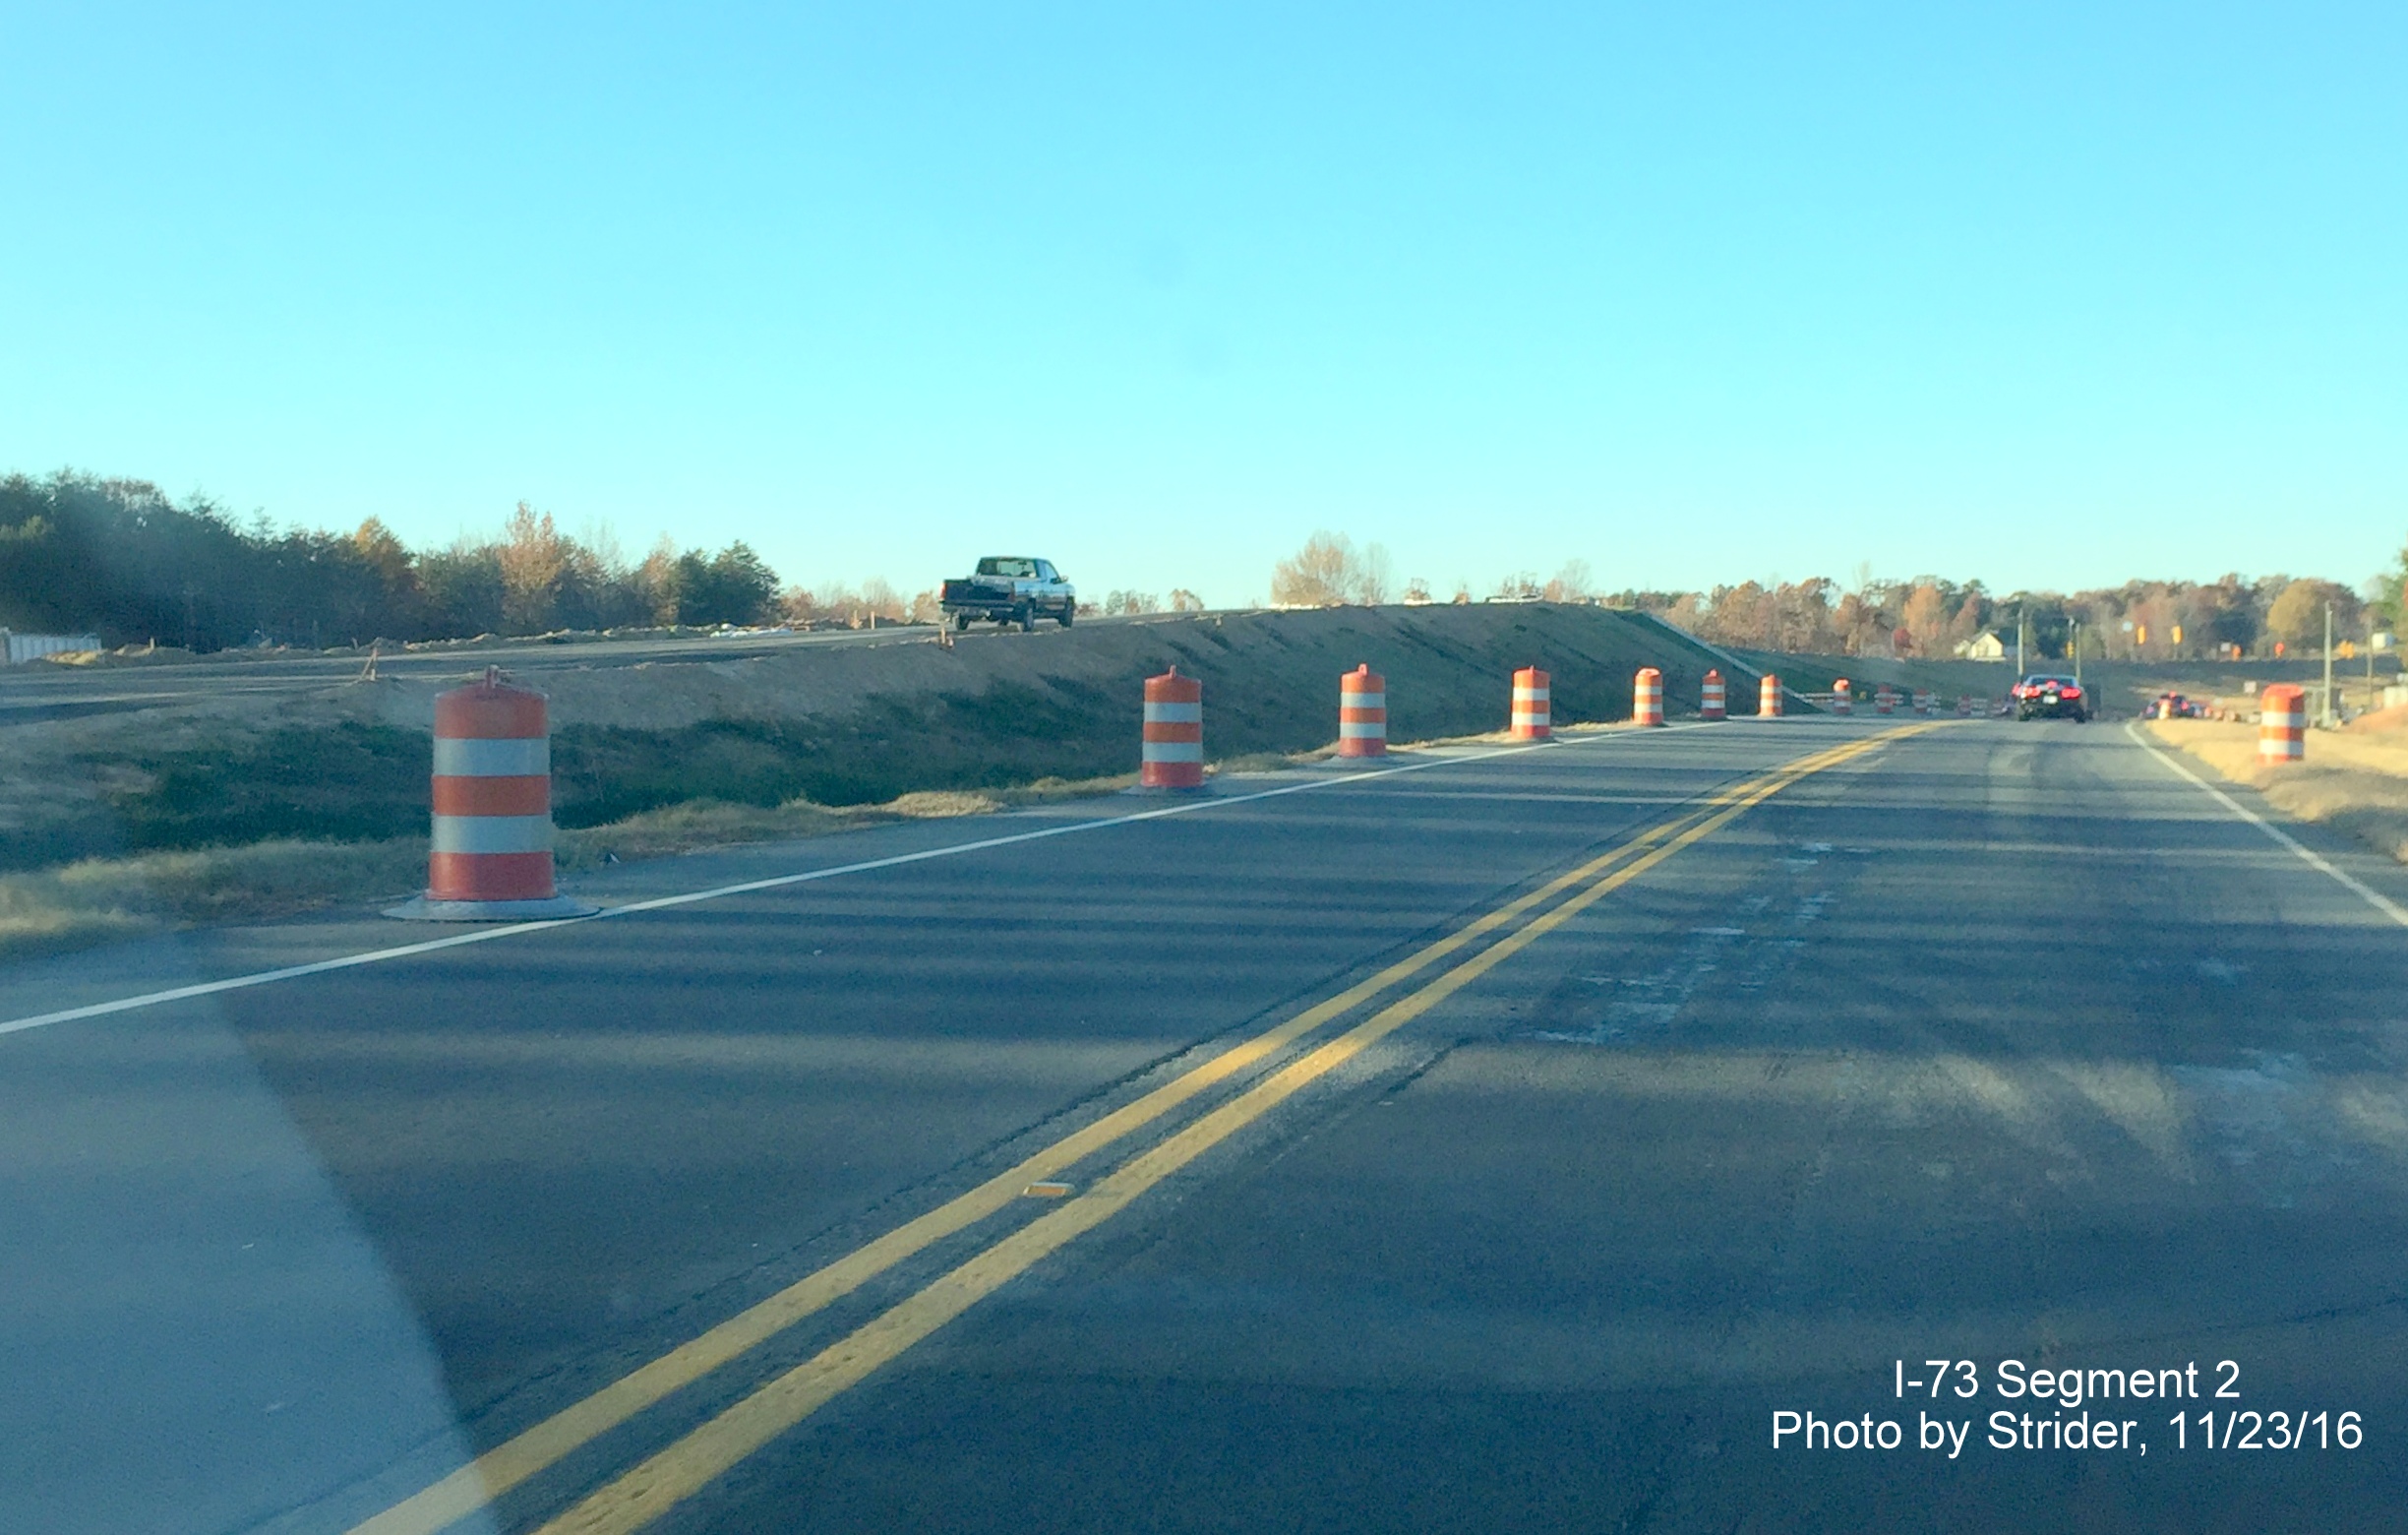 Image of Future I-73 roadway and bridge under construction at US 220 and NC 68 intersection in Rockingham County, by Strider